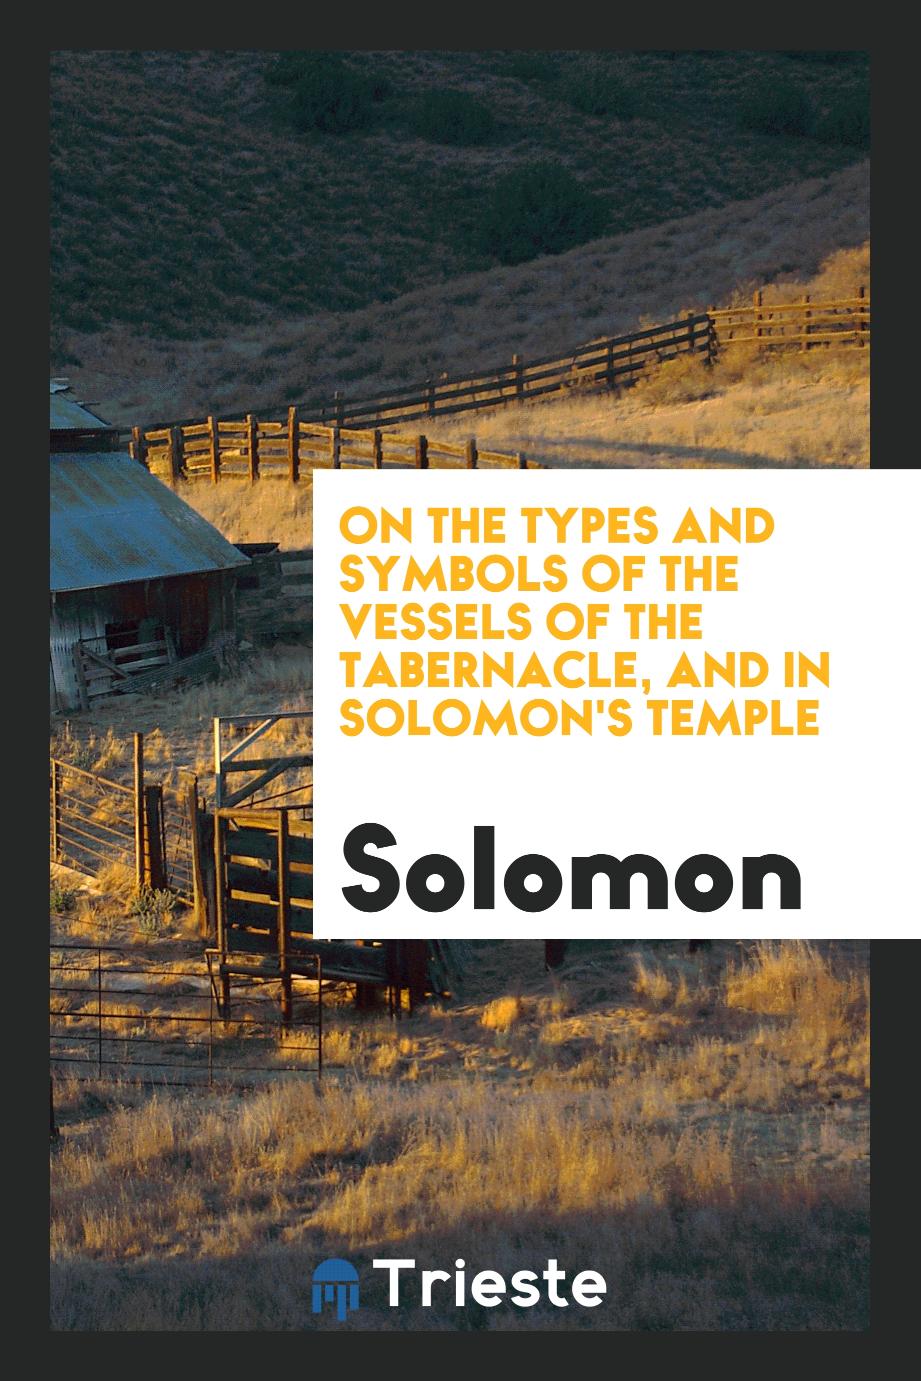 On the Types and Symbols of the Vessels of the Tabernacle, and in Solomon's Temple